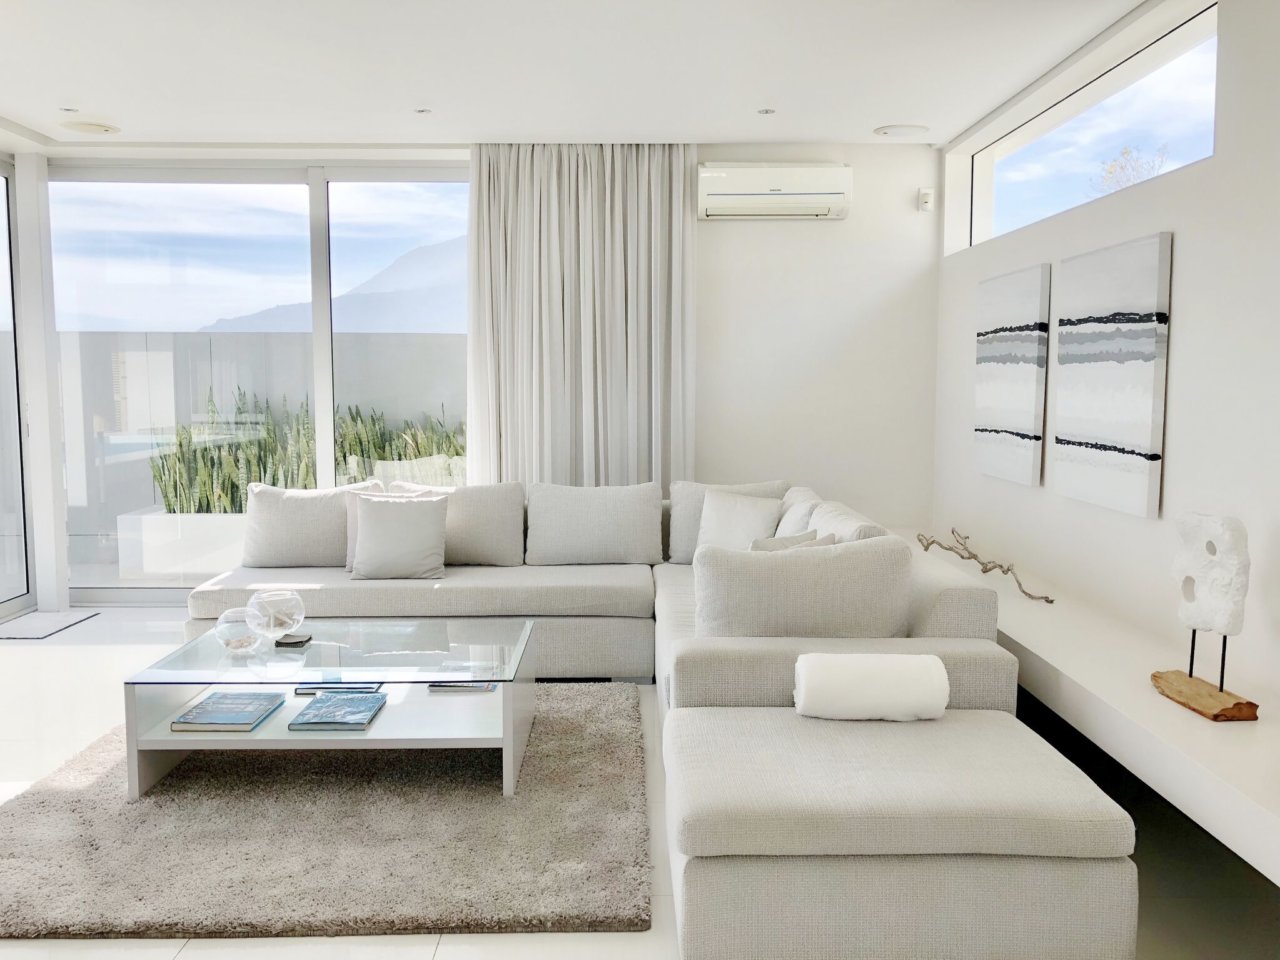 Photo 6 of Aqua Penthouse accommodation in Camps Bay, Cape Town with 2 bedrooms and 2 bathrooms